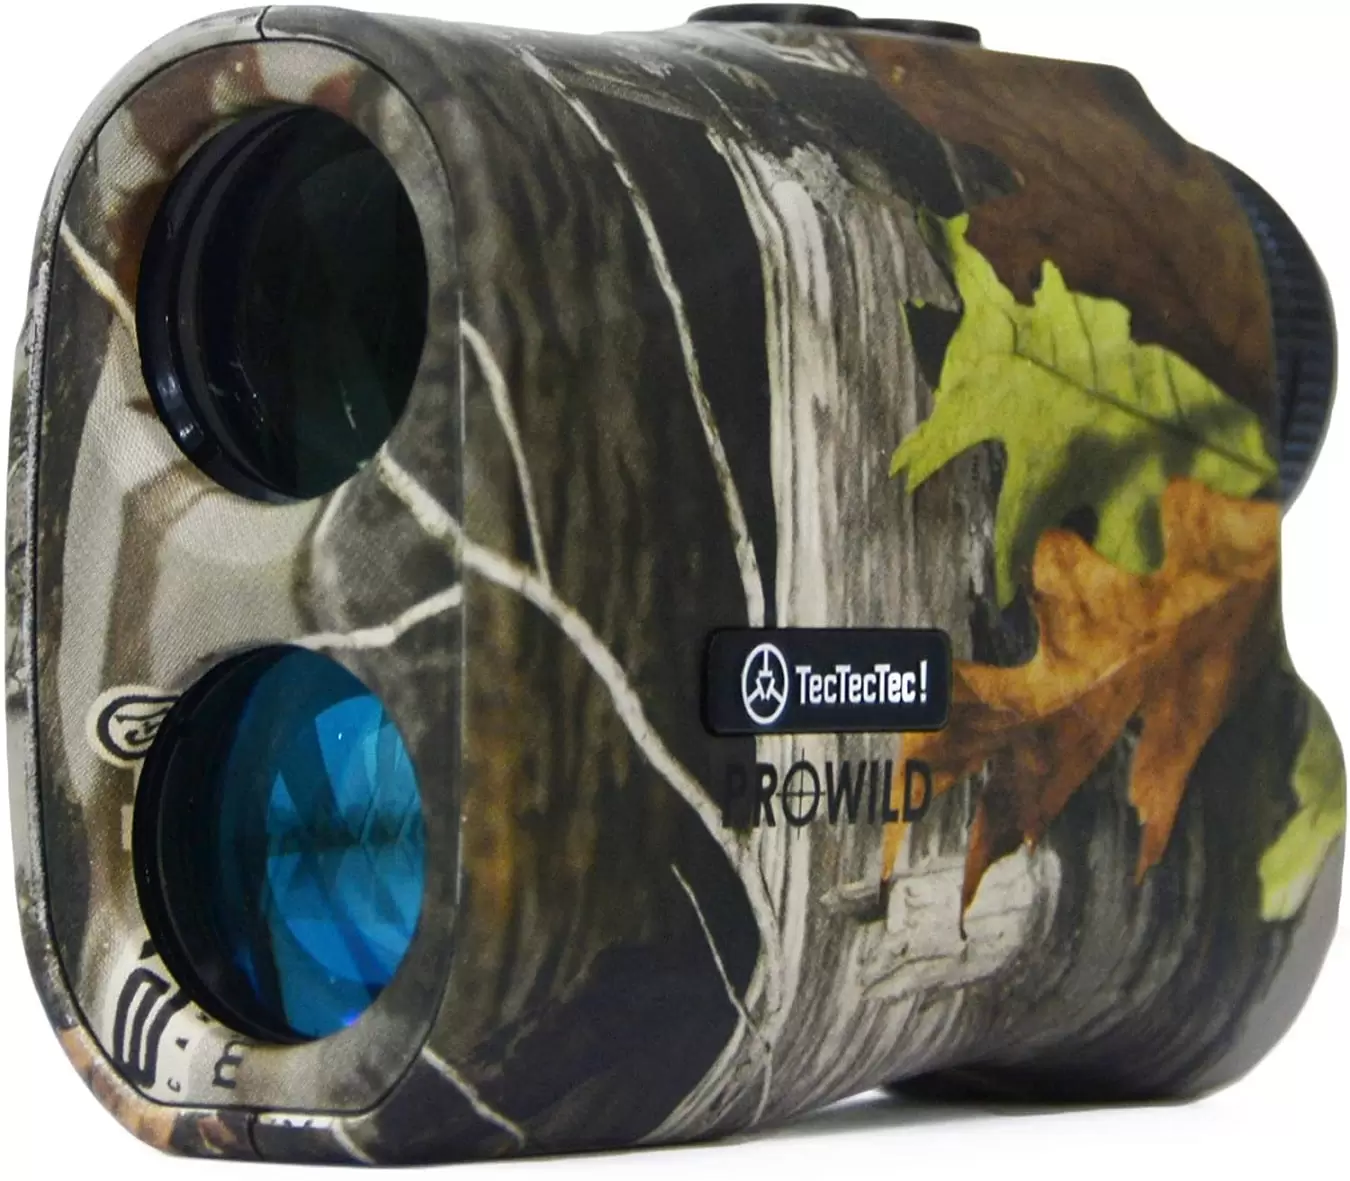 TecTecTec Pro Cam Wild Hunting Rangefinder product review